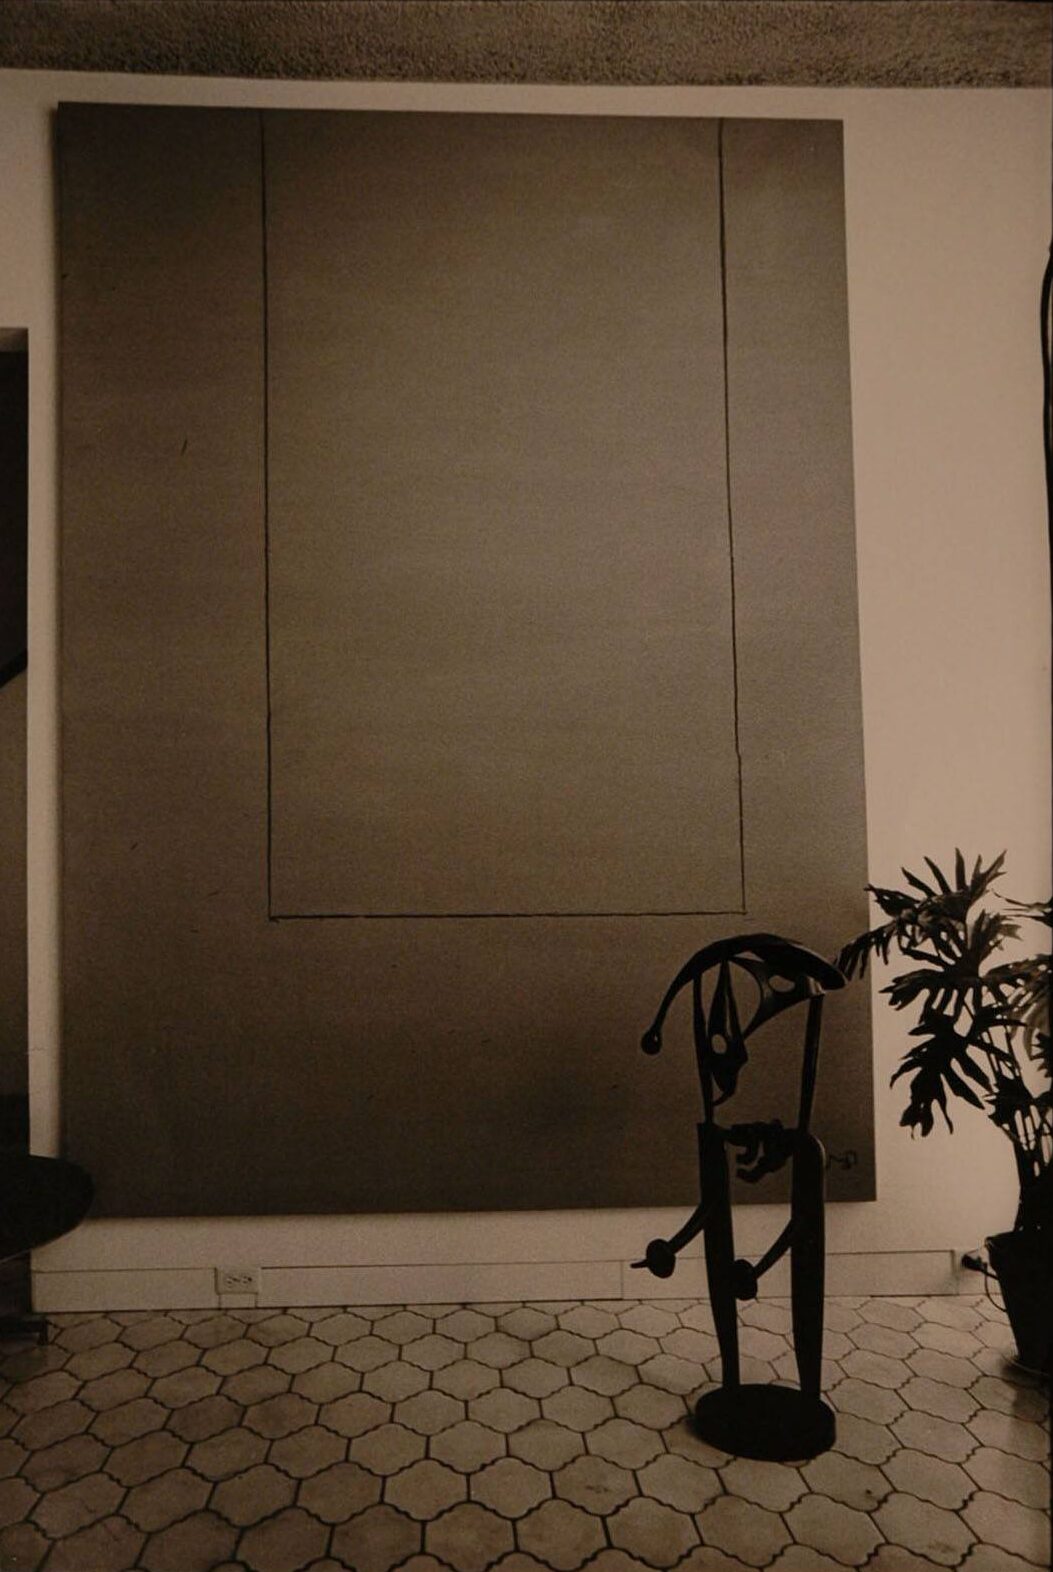 Open No. 1: In Yellow Ochre installed in Motherwell’s 173 East 94th Street, New York home, October 1967